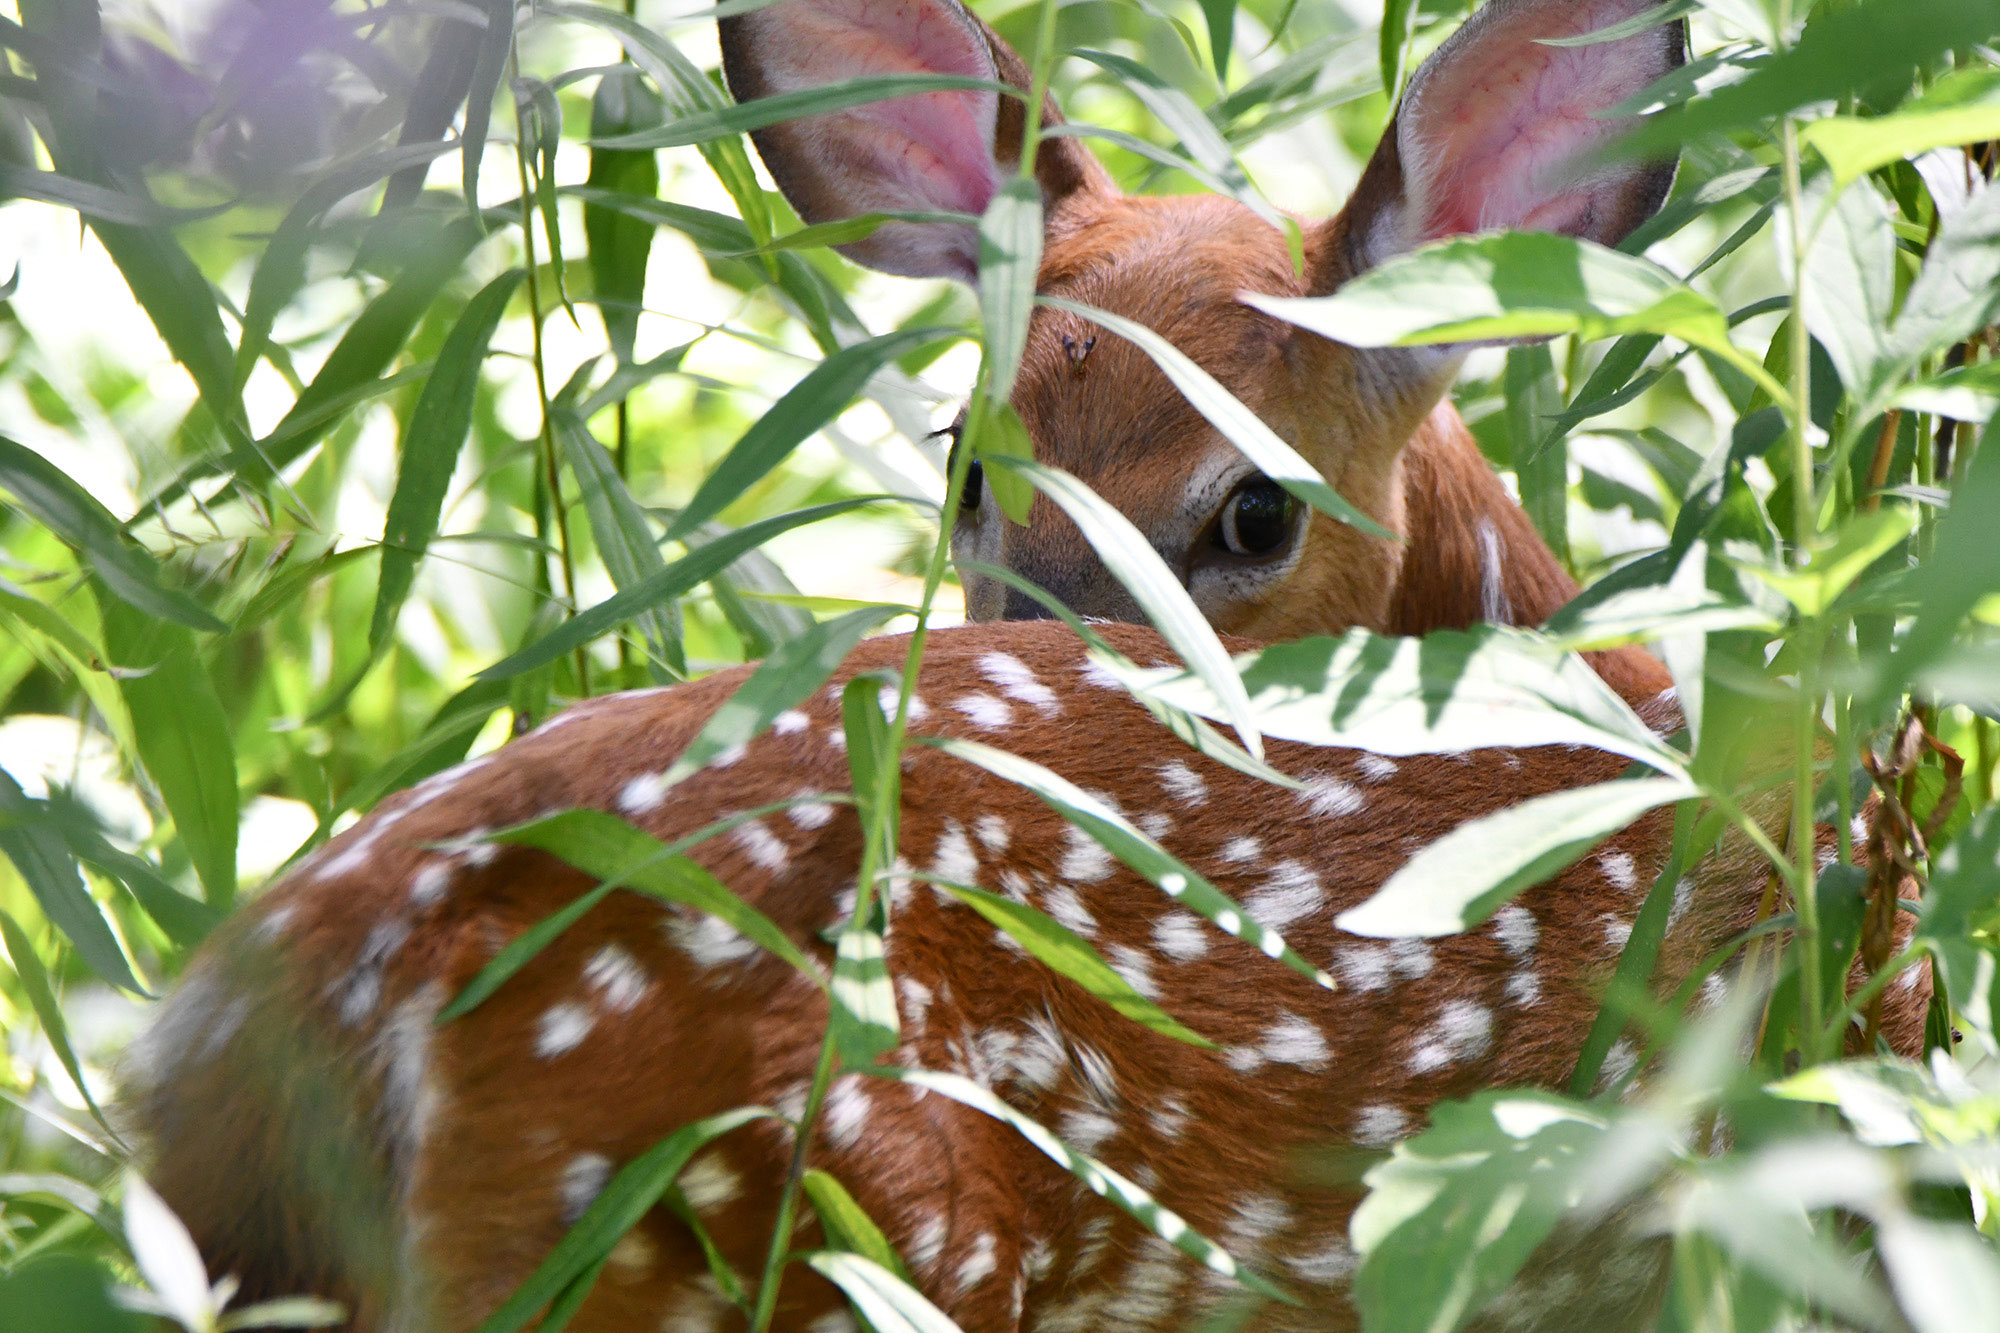 A fawn laying in vegetation.